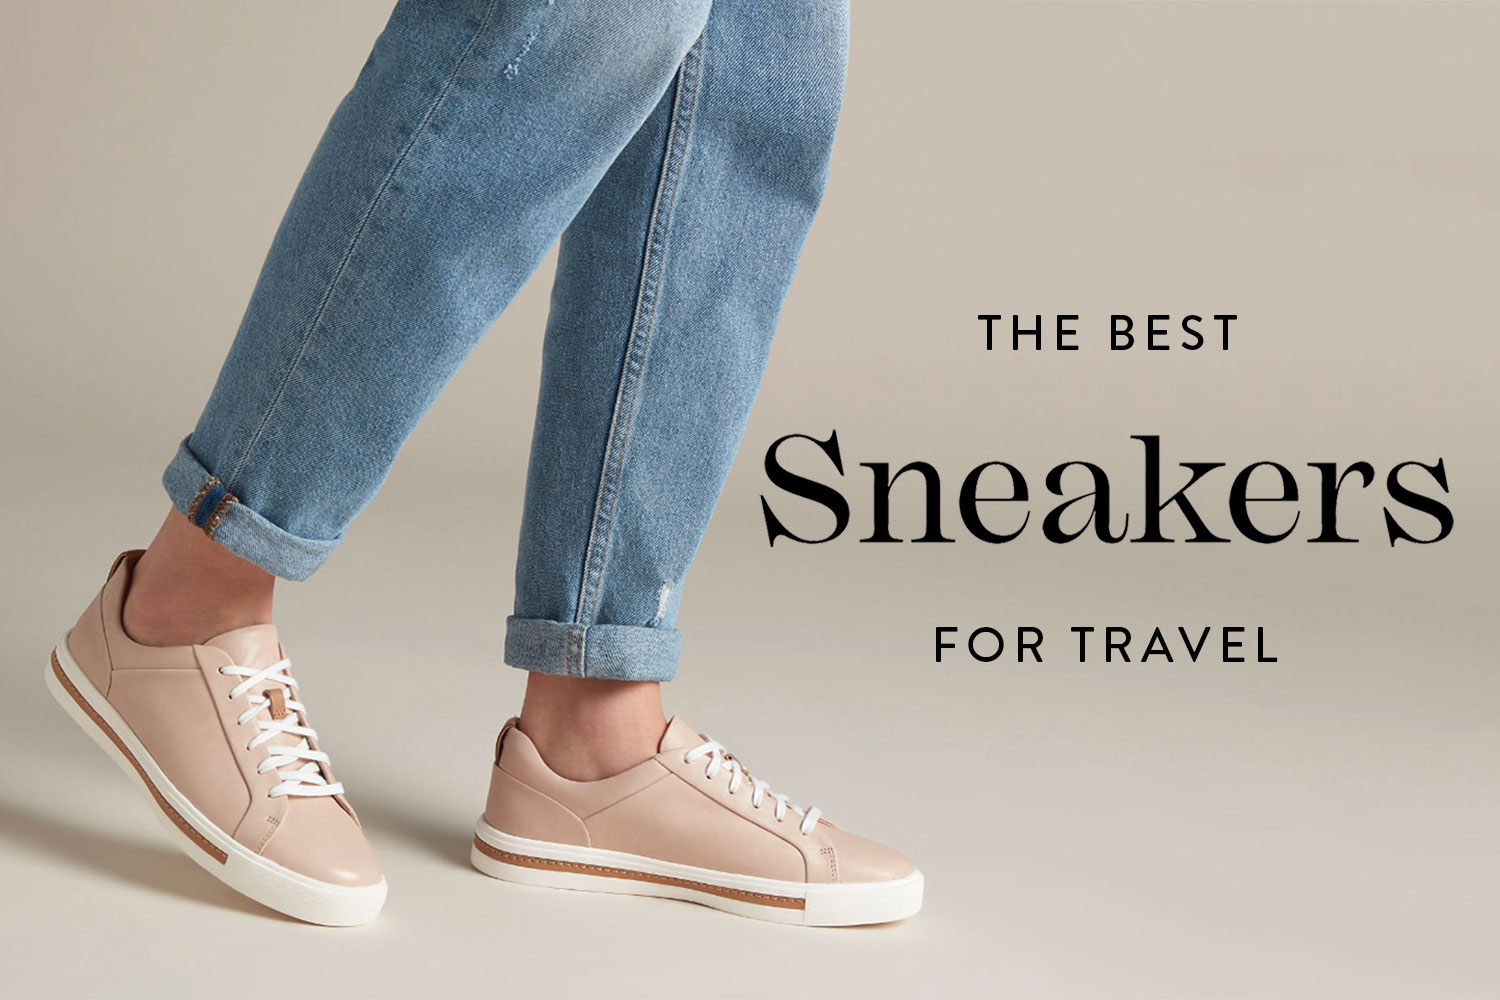 best walking shoes for travel